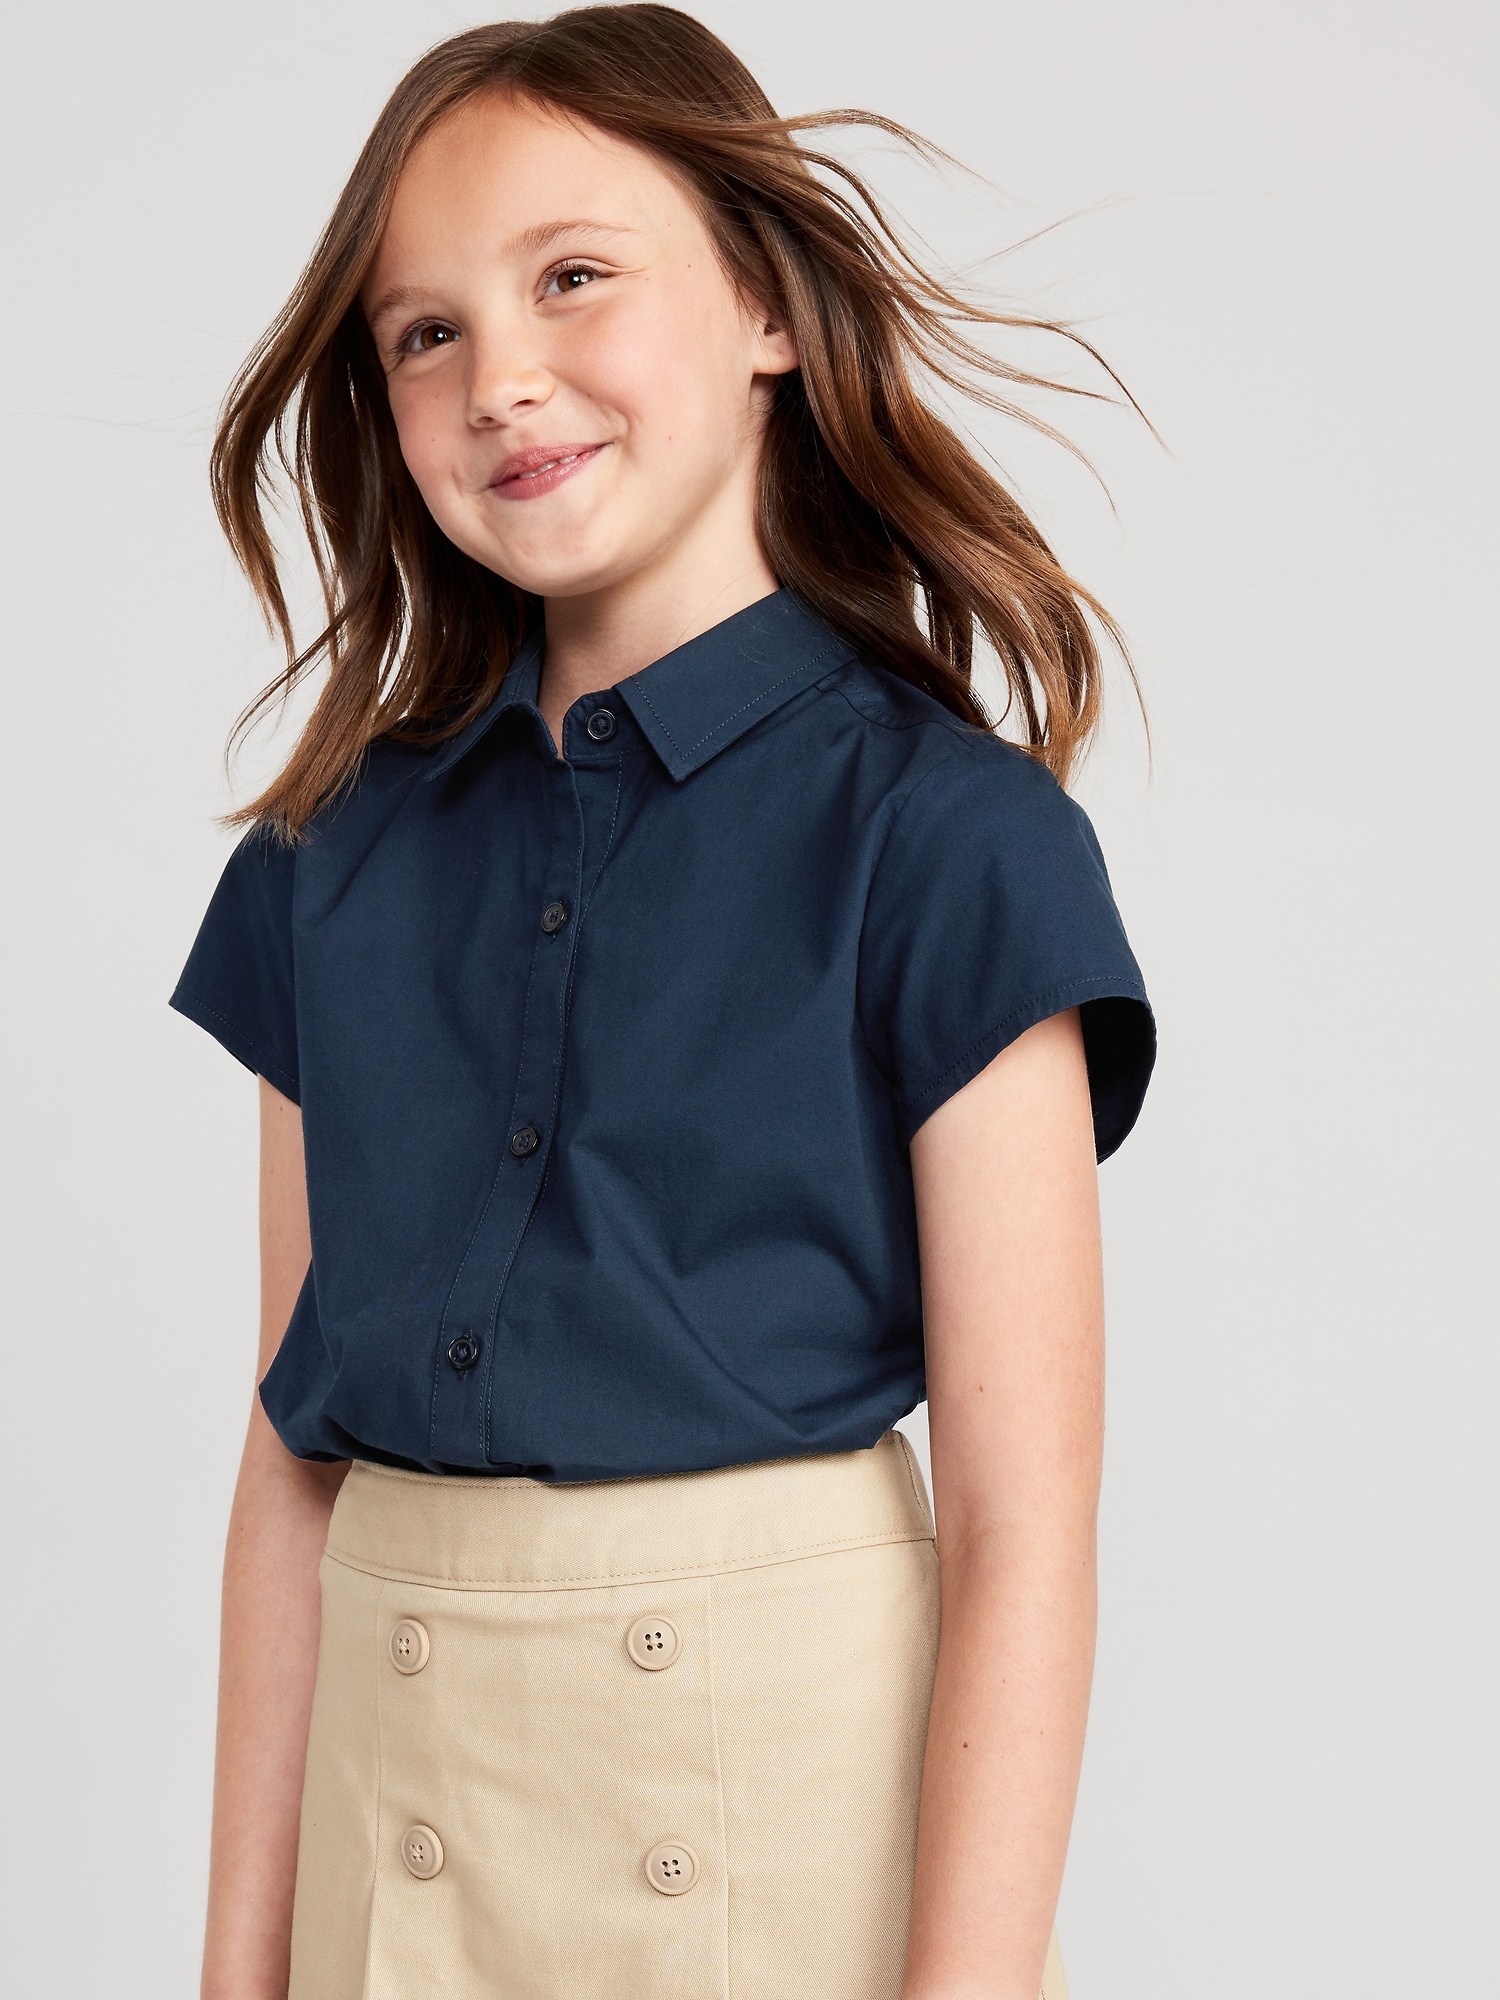 Back to School Clothes | Old Navy